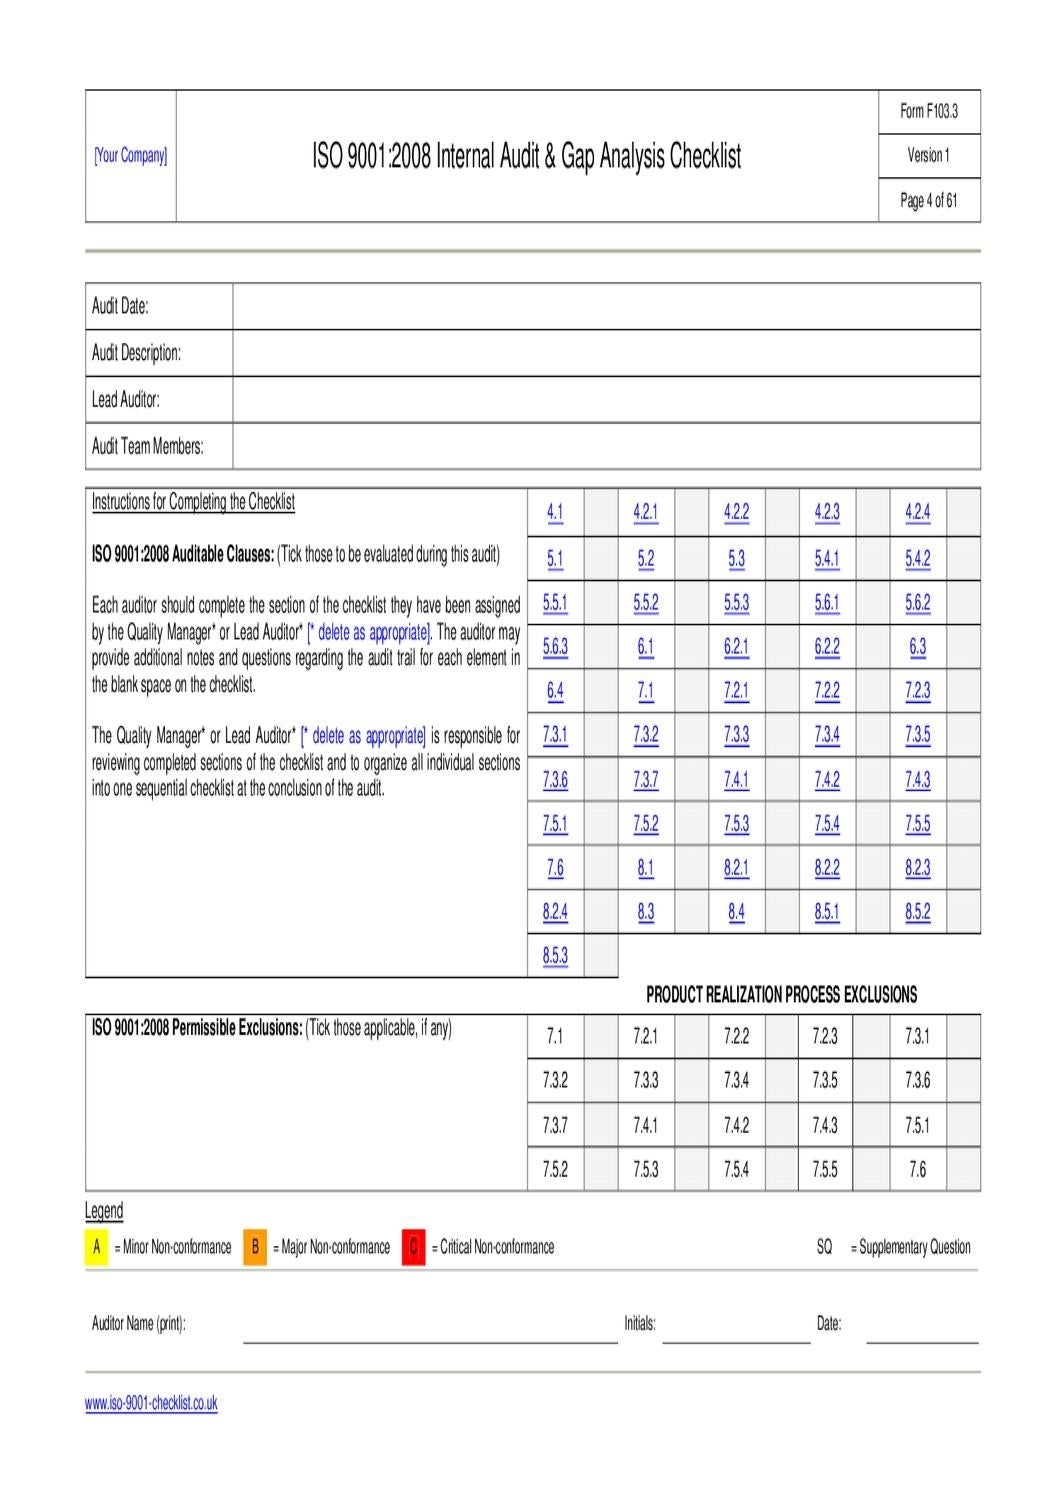 Internal-Audit-Checklist-Example By Iso 9001 Checklist - Issuu in Internal Audit Report Template Iso 9001